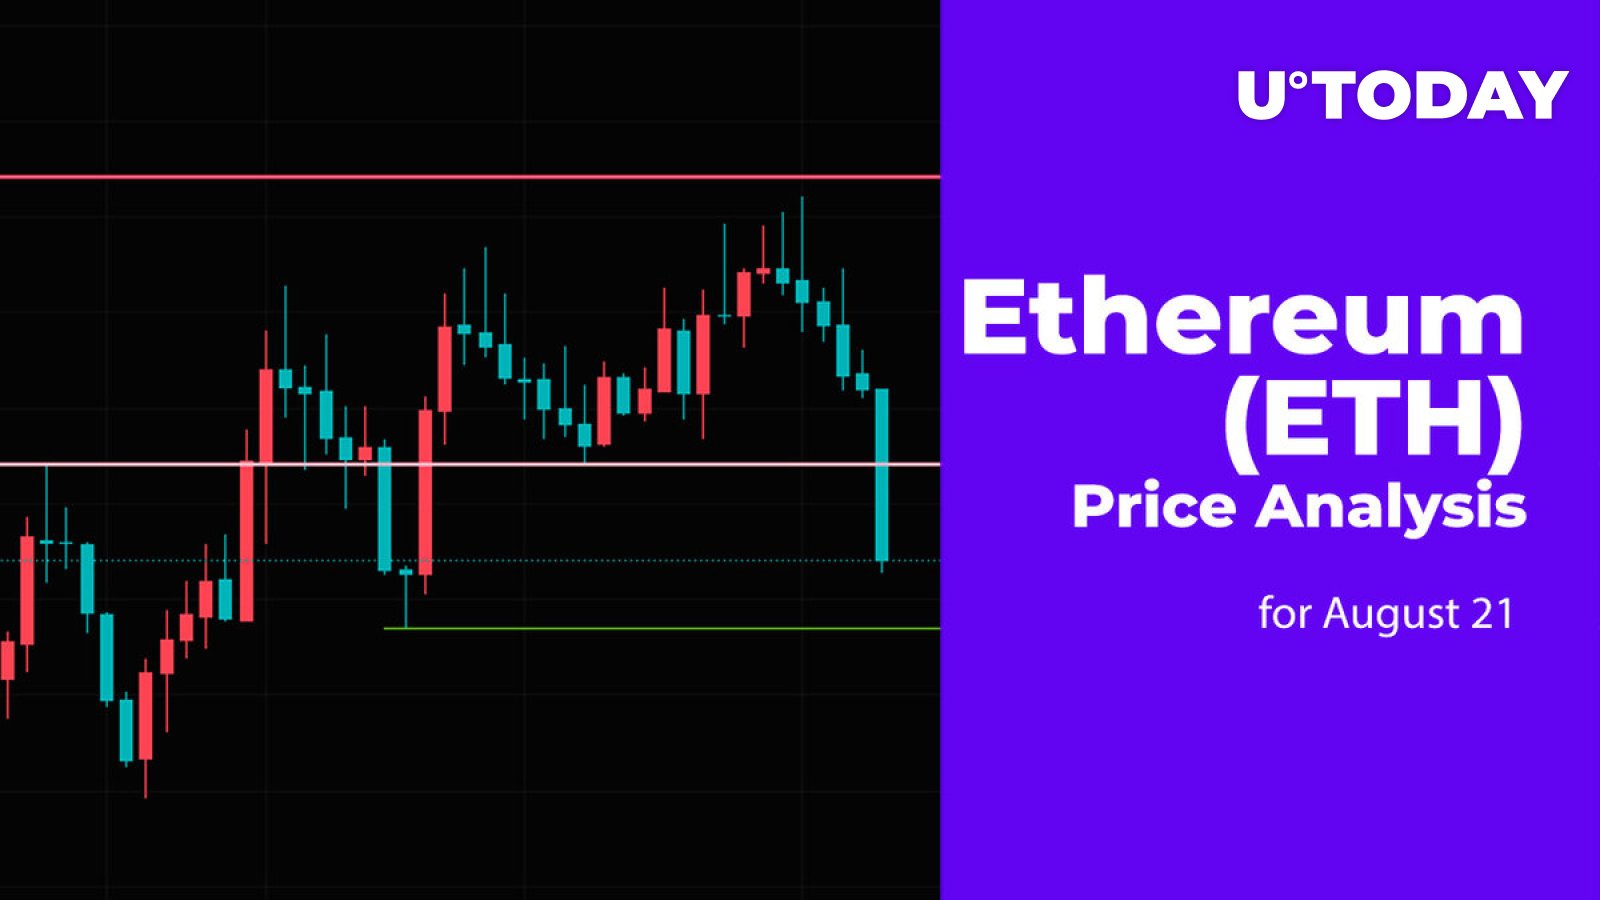 Ethereum (ETH) Price Analysis for August 21